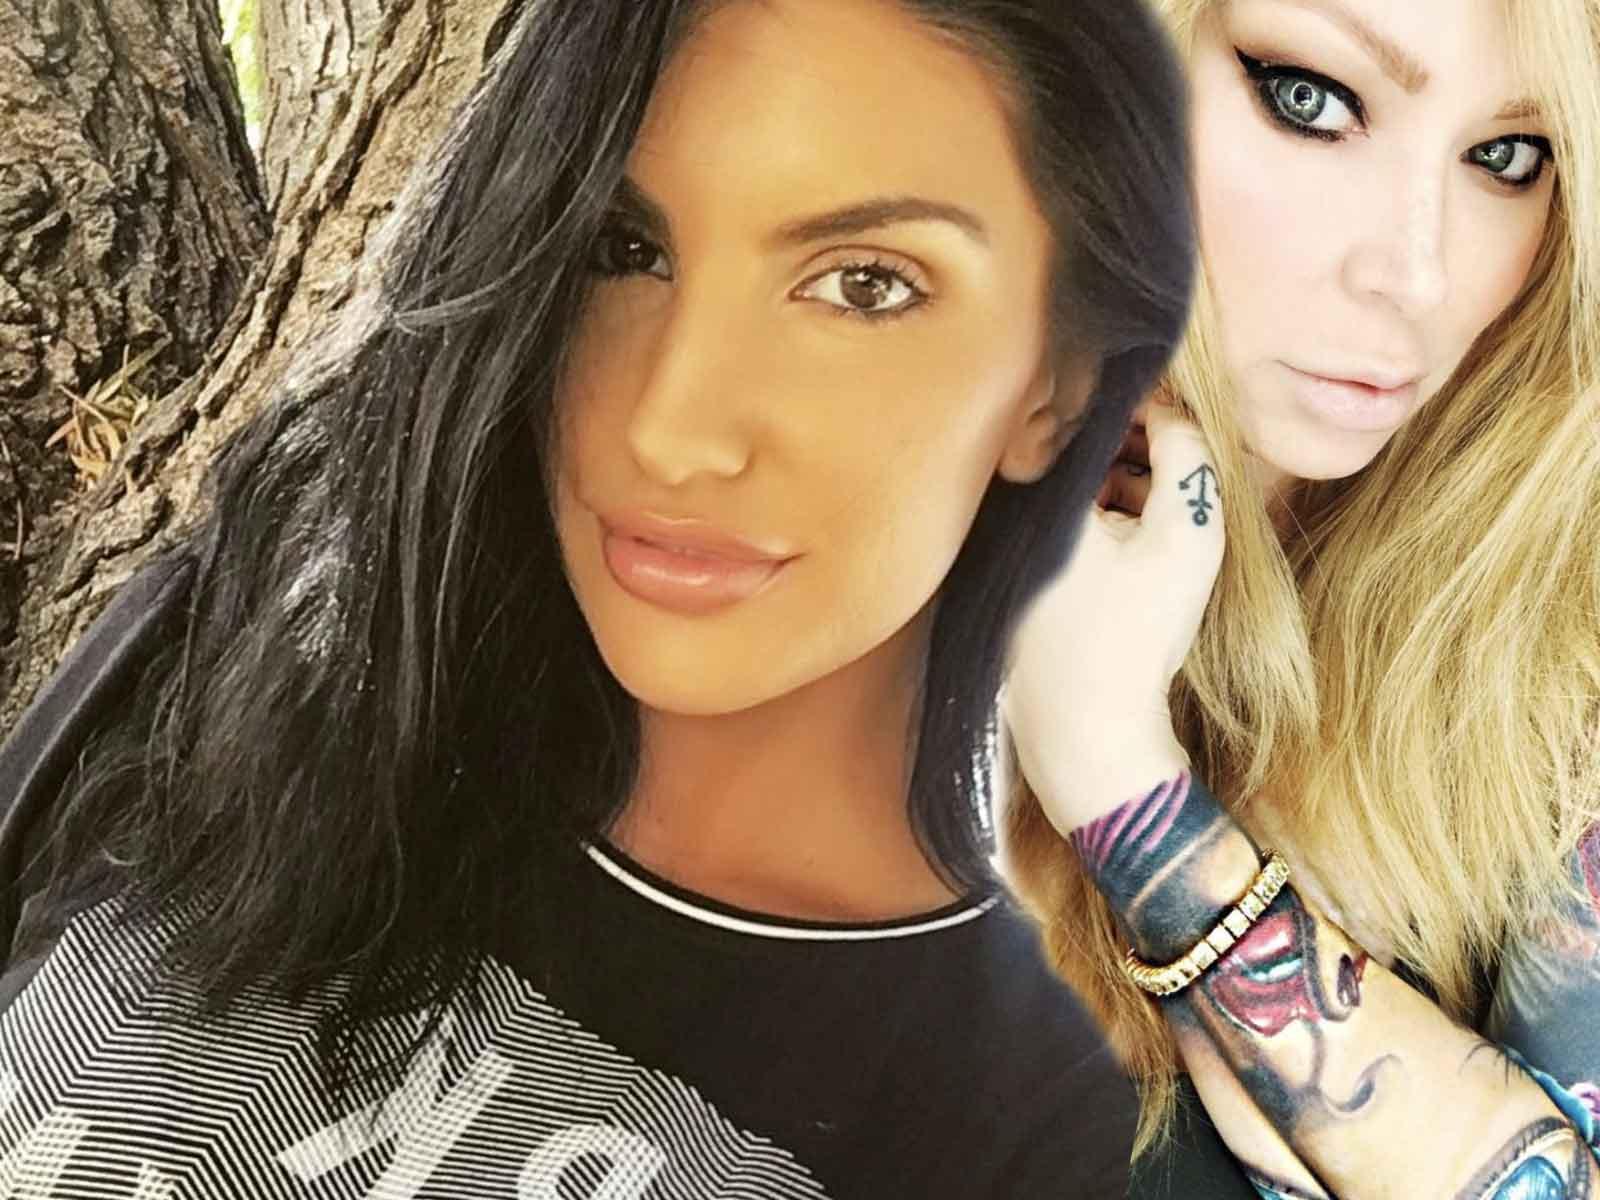 Jenna Jameson Rips Pornstars for ‘Bullying’ August Ames: ‘Her Blood Is On Their Hands’